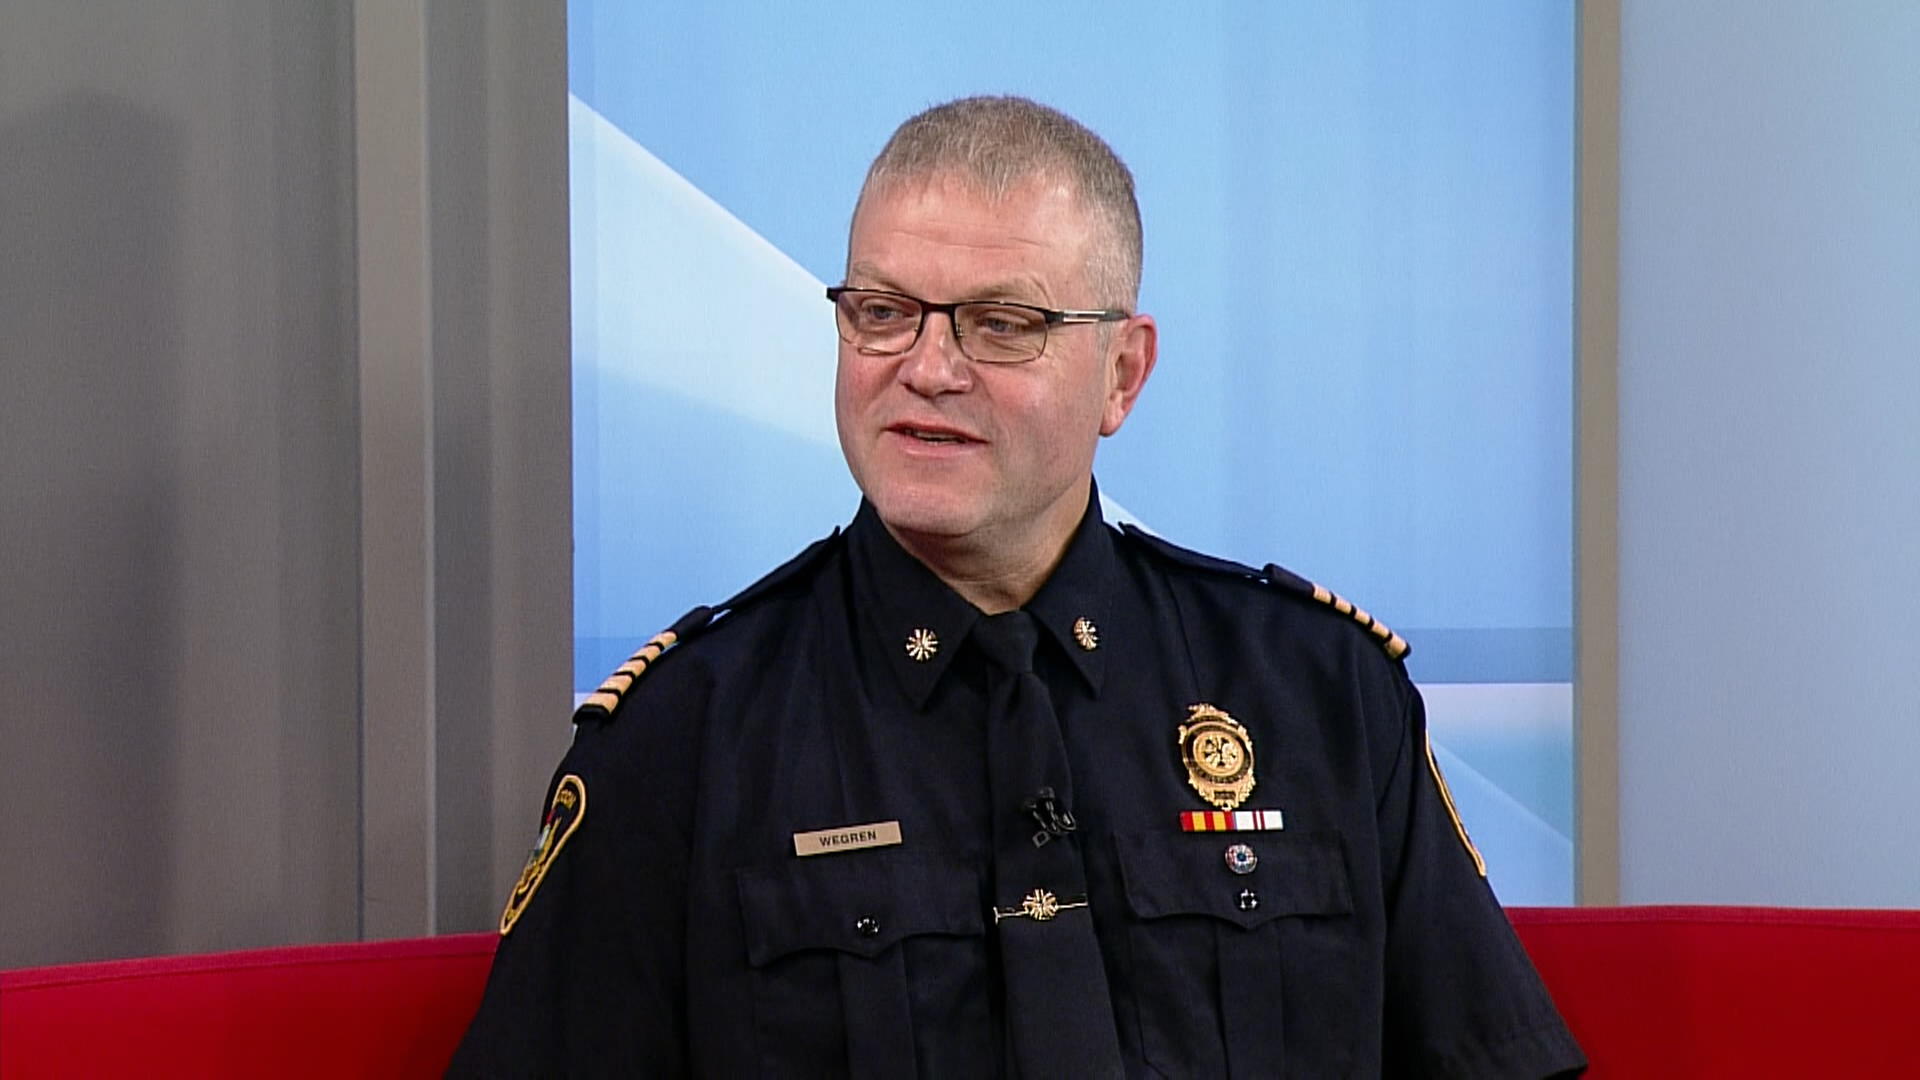 Saskatoon’s new fire chief discusses evolution of the city’s fire department